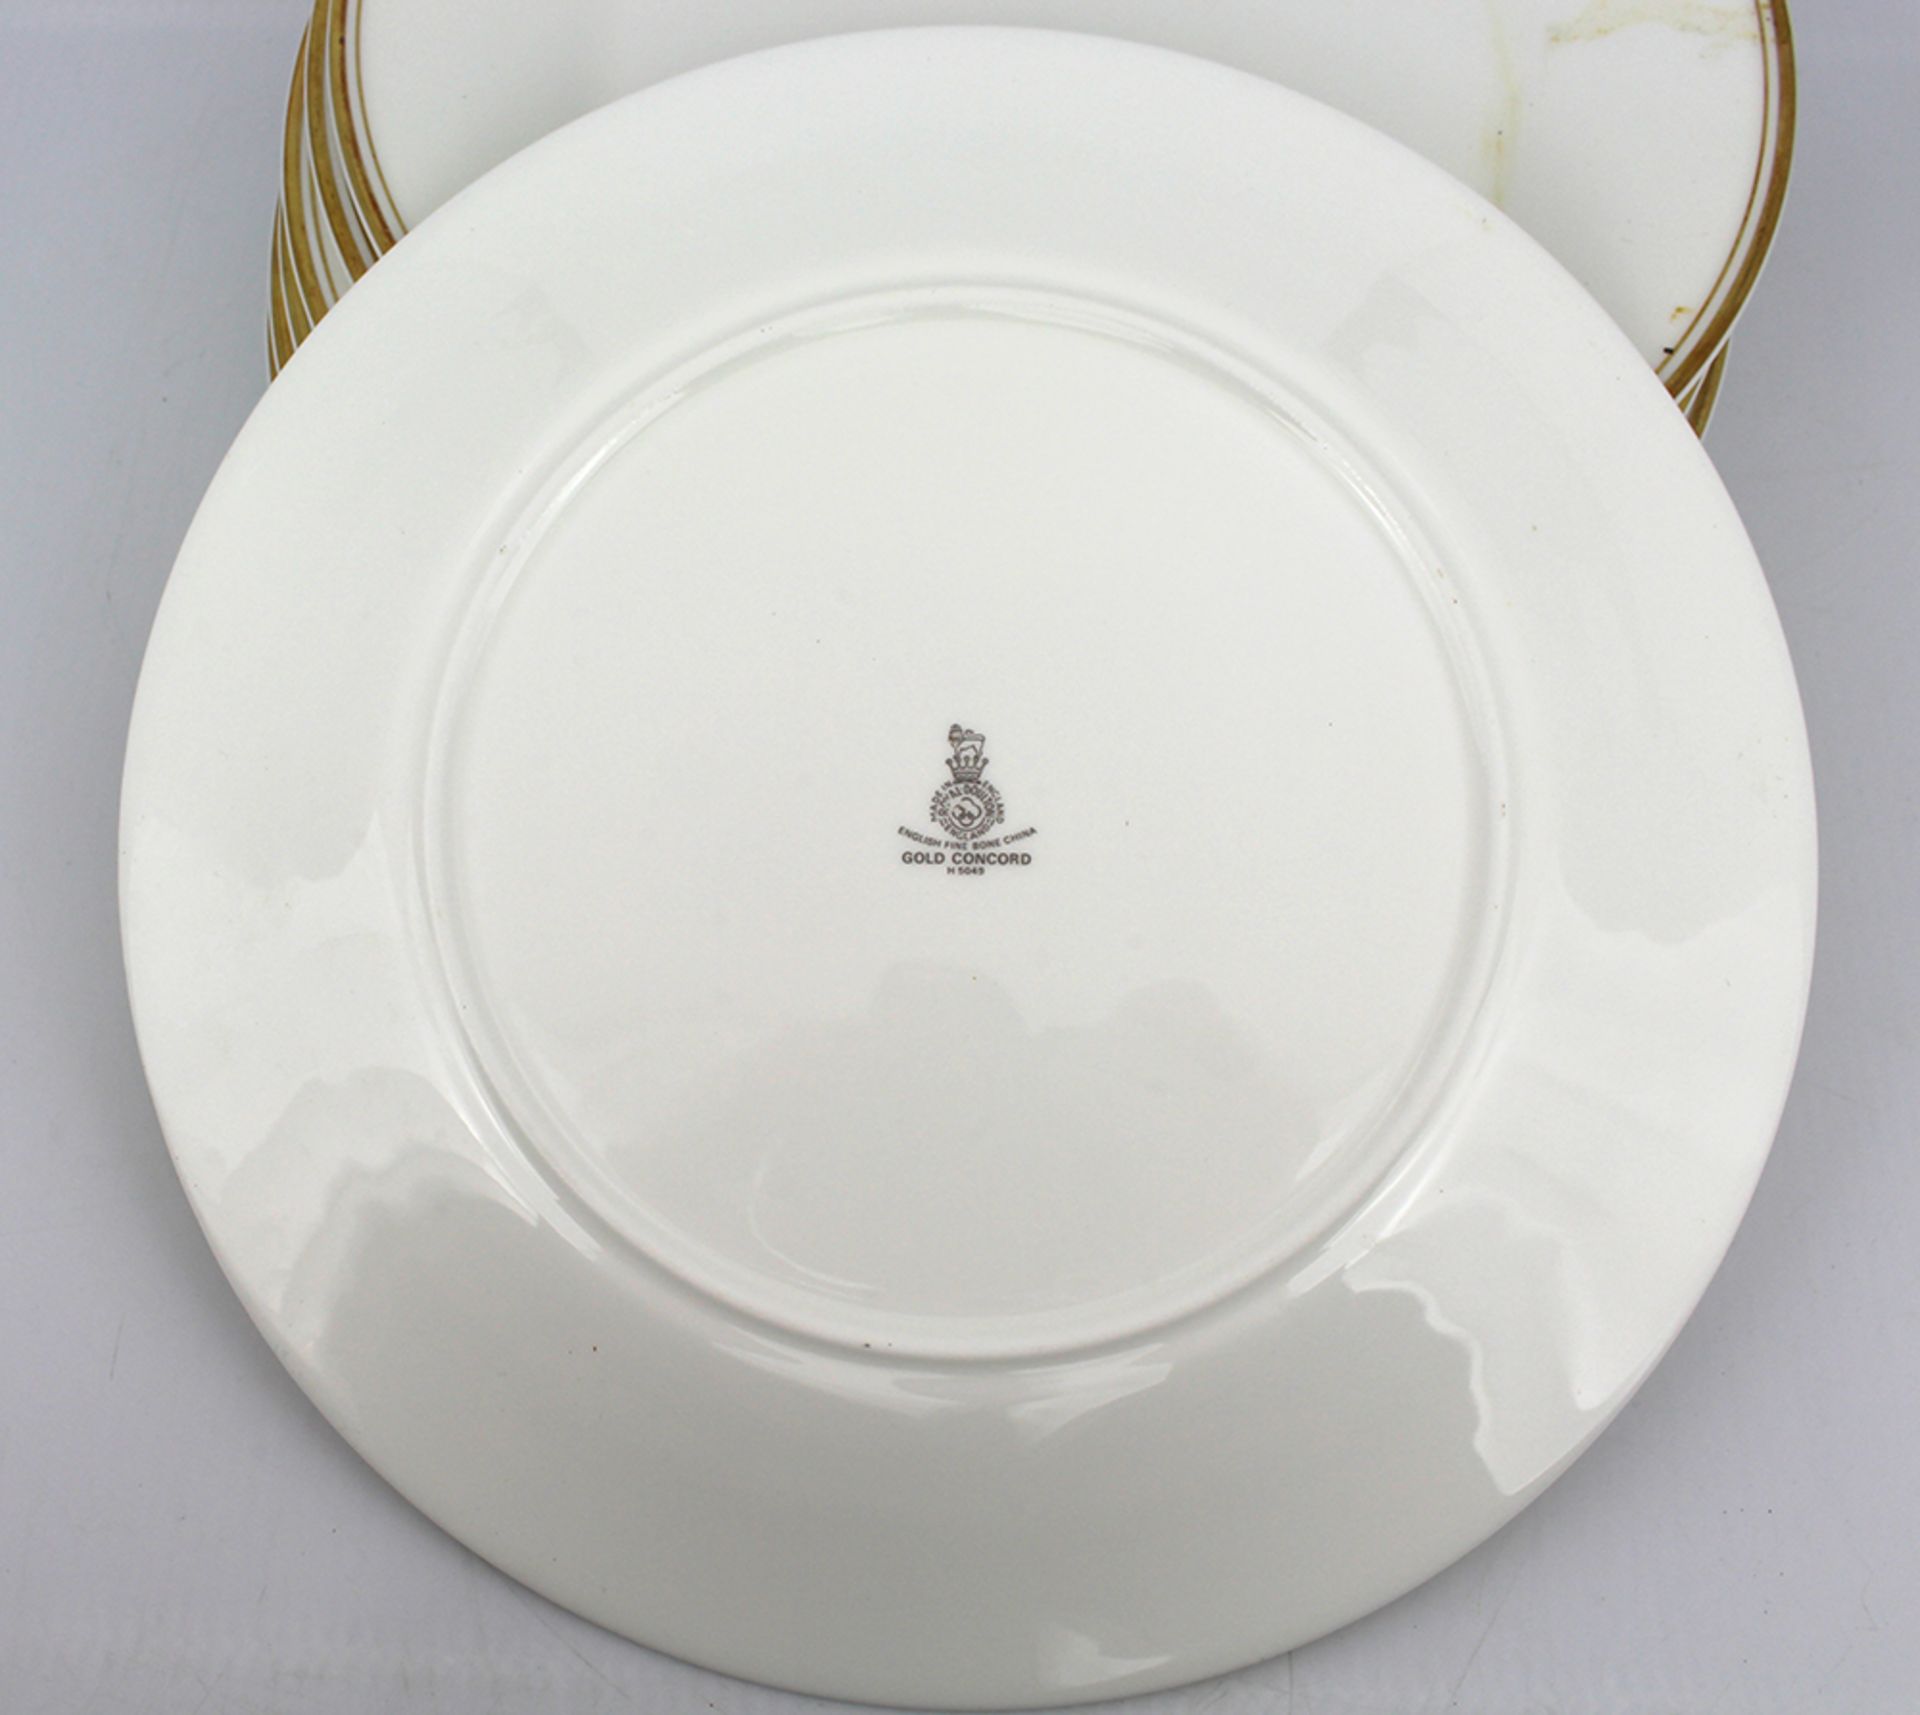 Set of 10 Royal Doulton Gold Concord Dinner Plates - Image 2 of 2